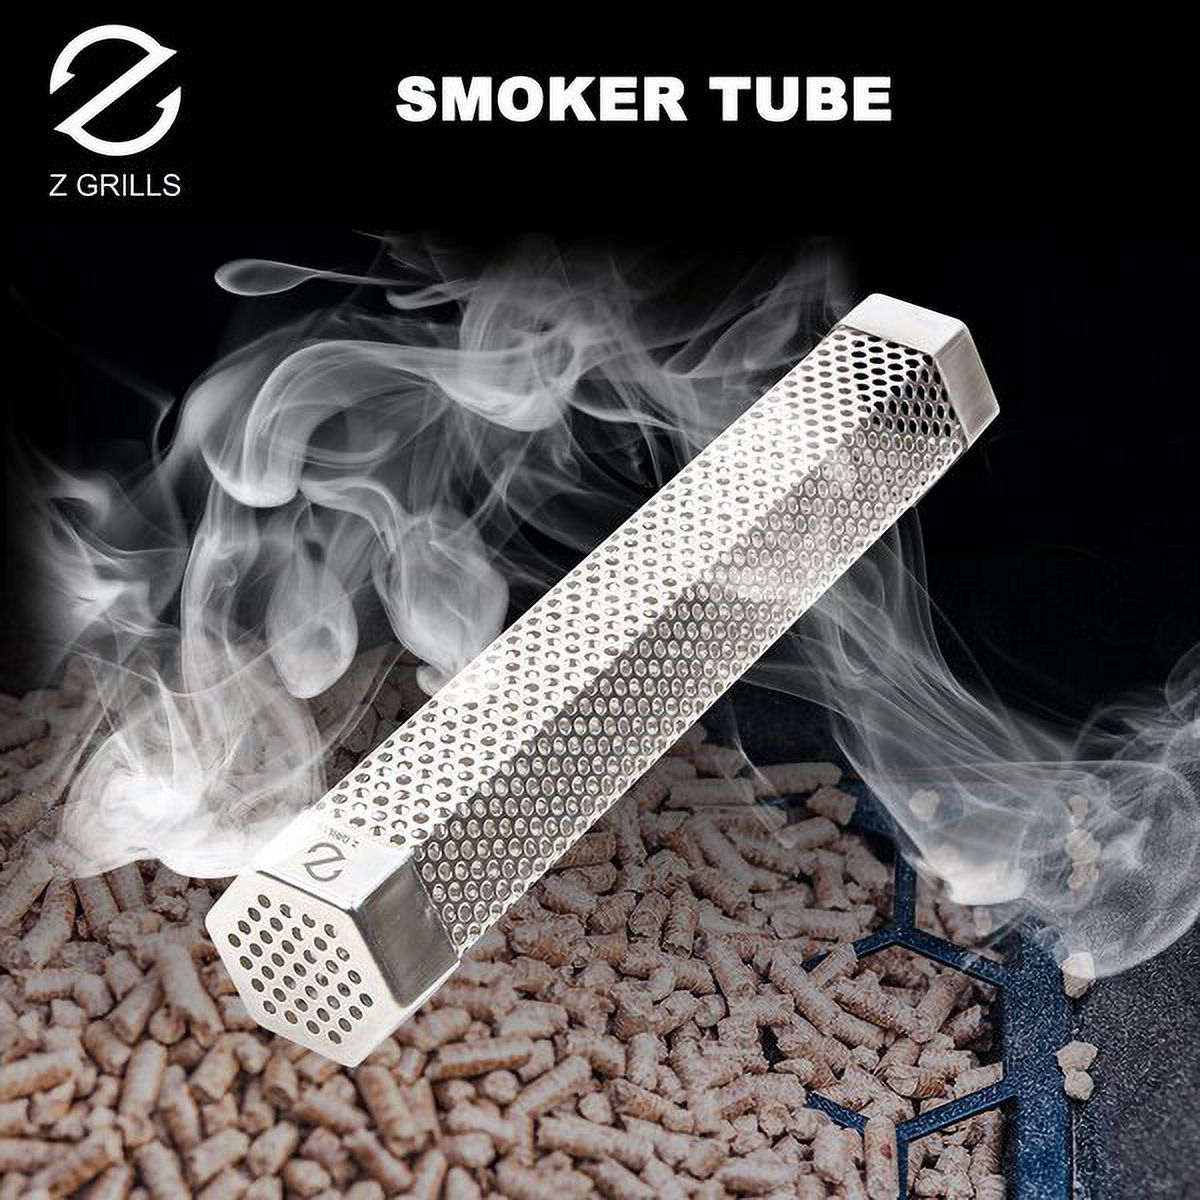 Z GRILLS Pellet Smoker Tube, 12'' Stainless Steel BBQ Wood Pellet Tube Smoker for Cold/Hot Smoking - image 4 of 5